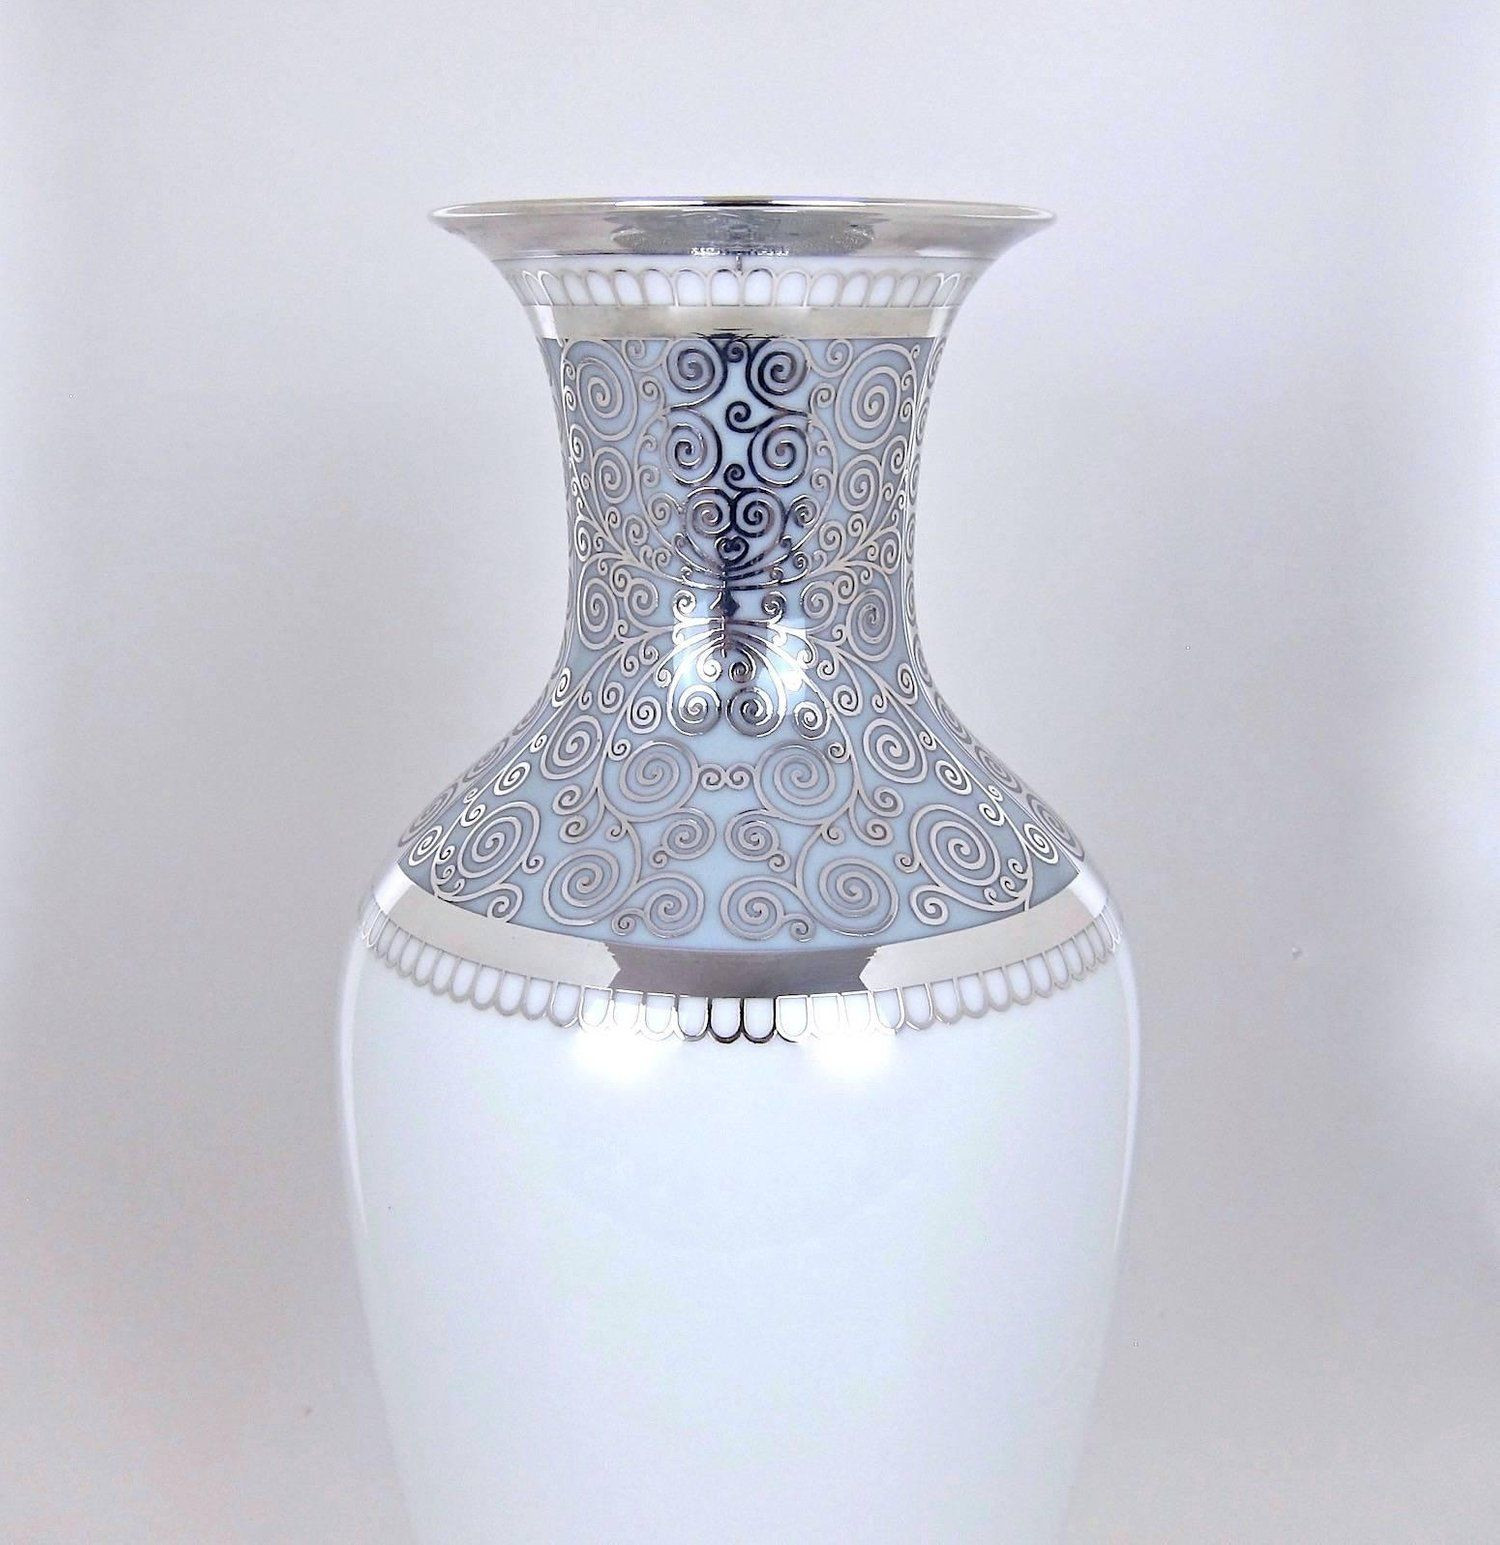 20 Perfect norleans Vase Made In Italy 2024 free download norleans vase made in italy of 18 mid century glass vase the weekly world pertaining to 18 mid century glass vase